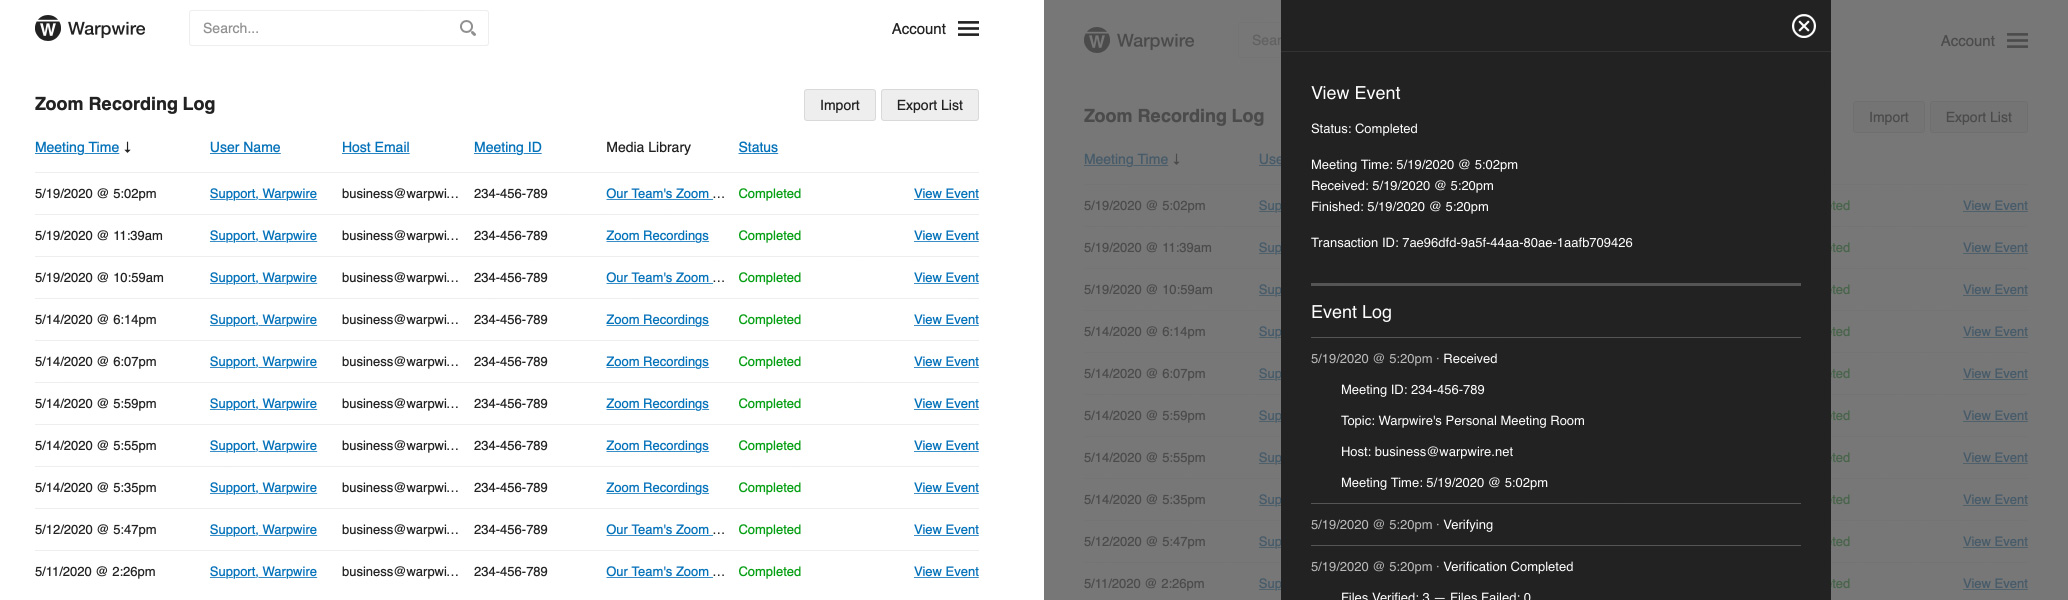 The Admin Tool inside of Warpwire allows Warpwire Admins to view detailed Zoom recording events.